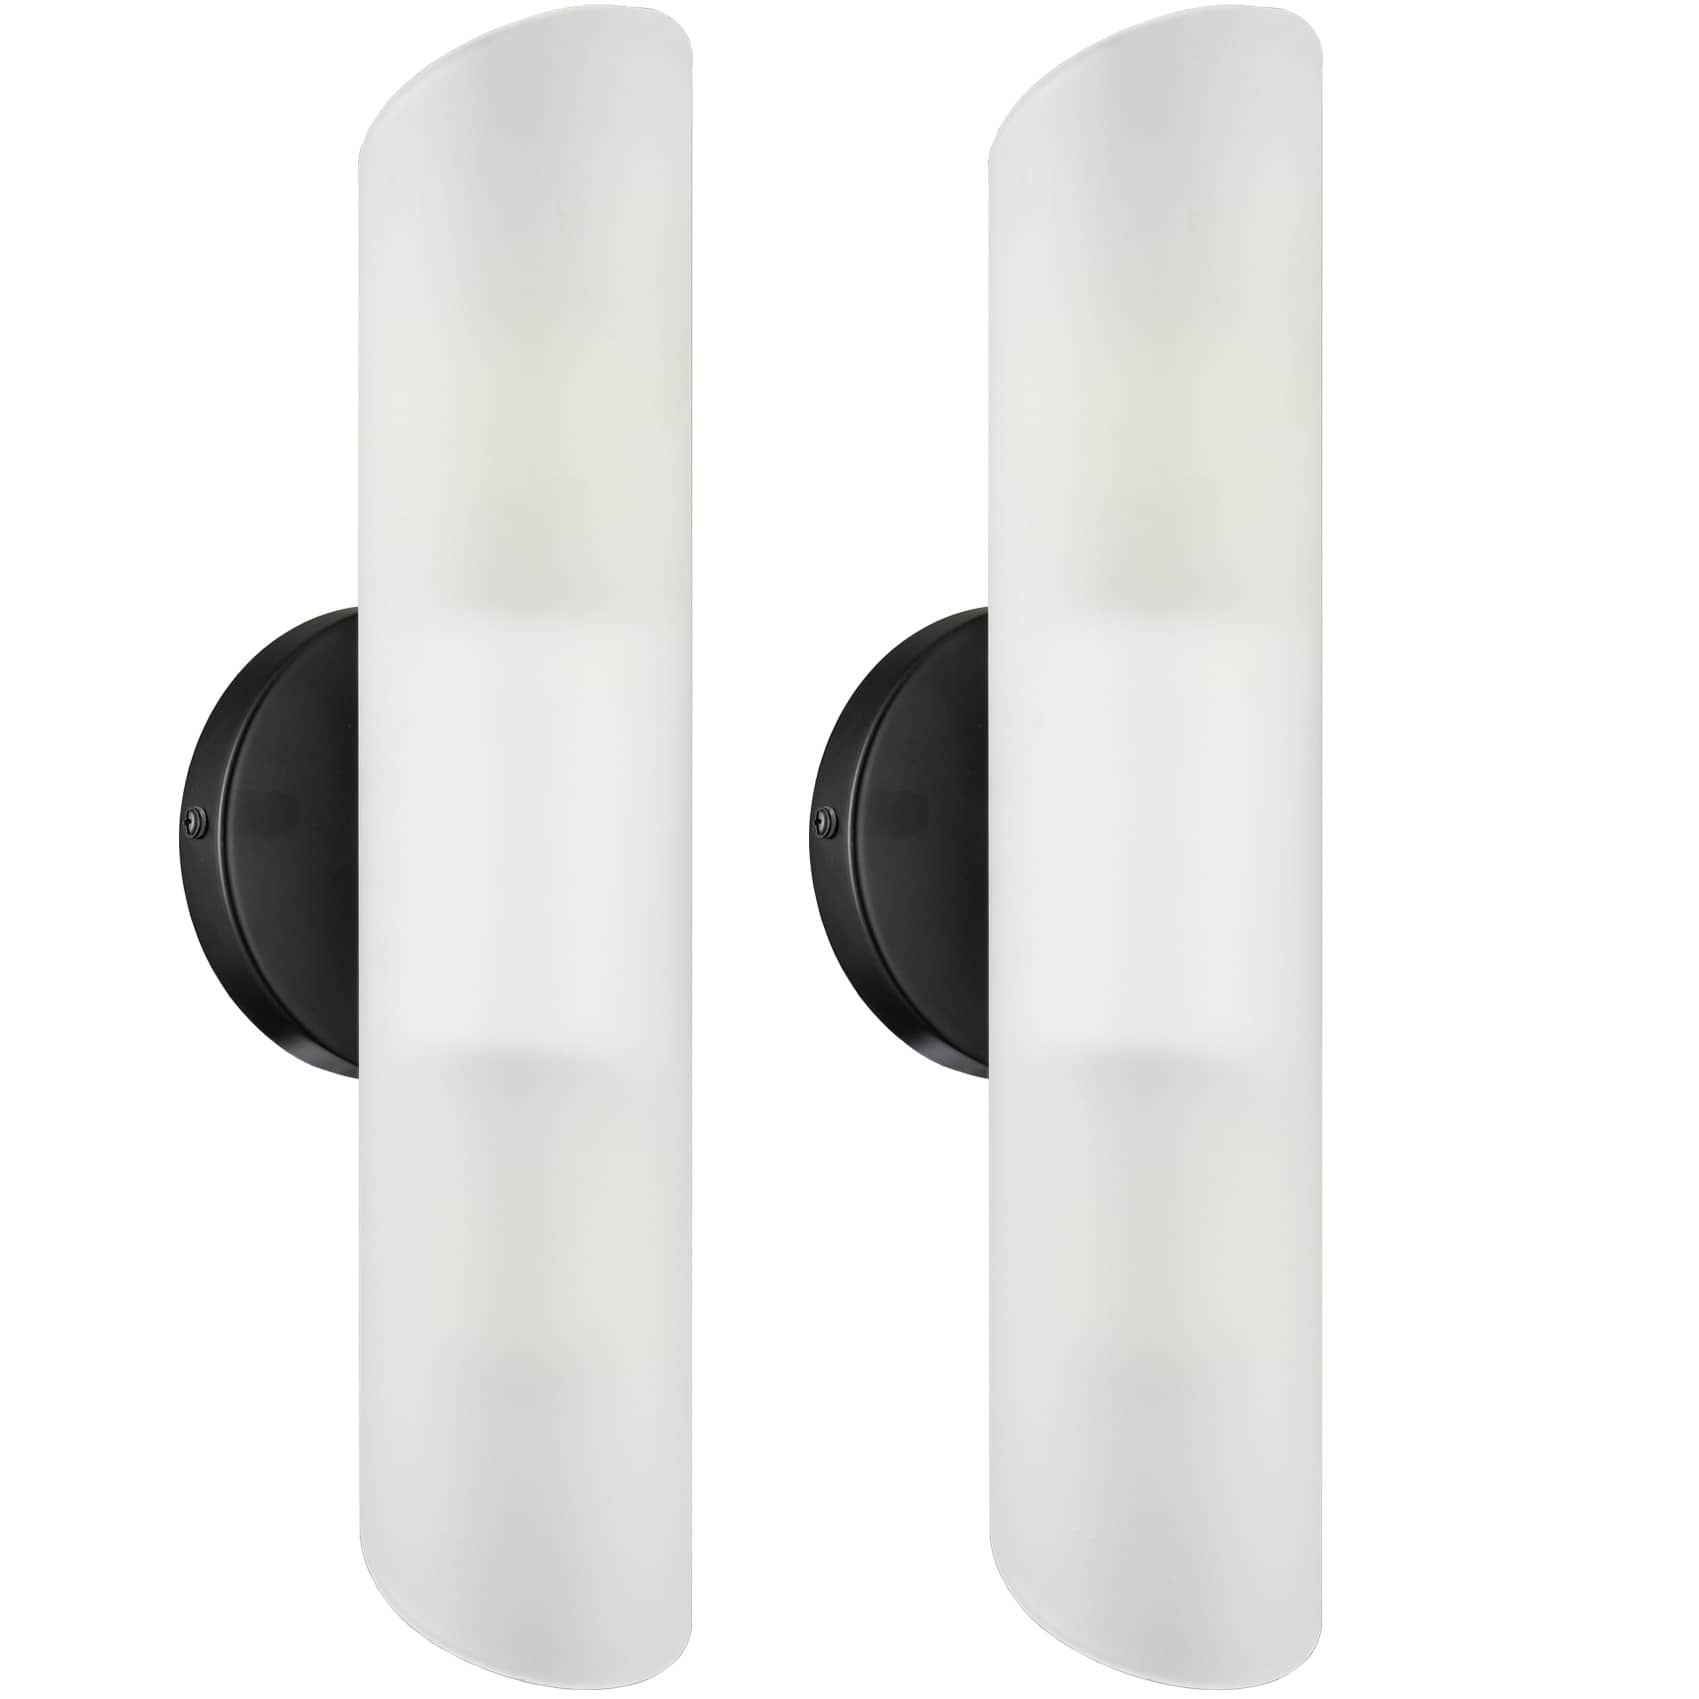 Modern Wall Sconces Set of Two with Frosted Glass